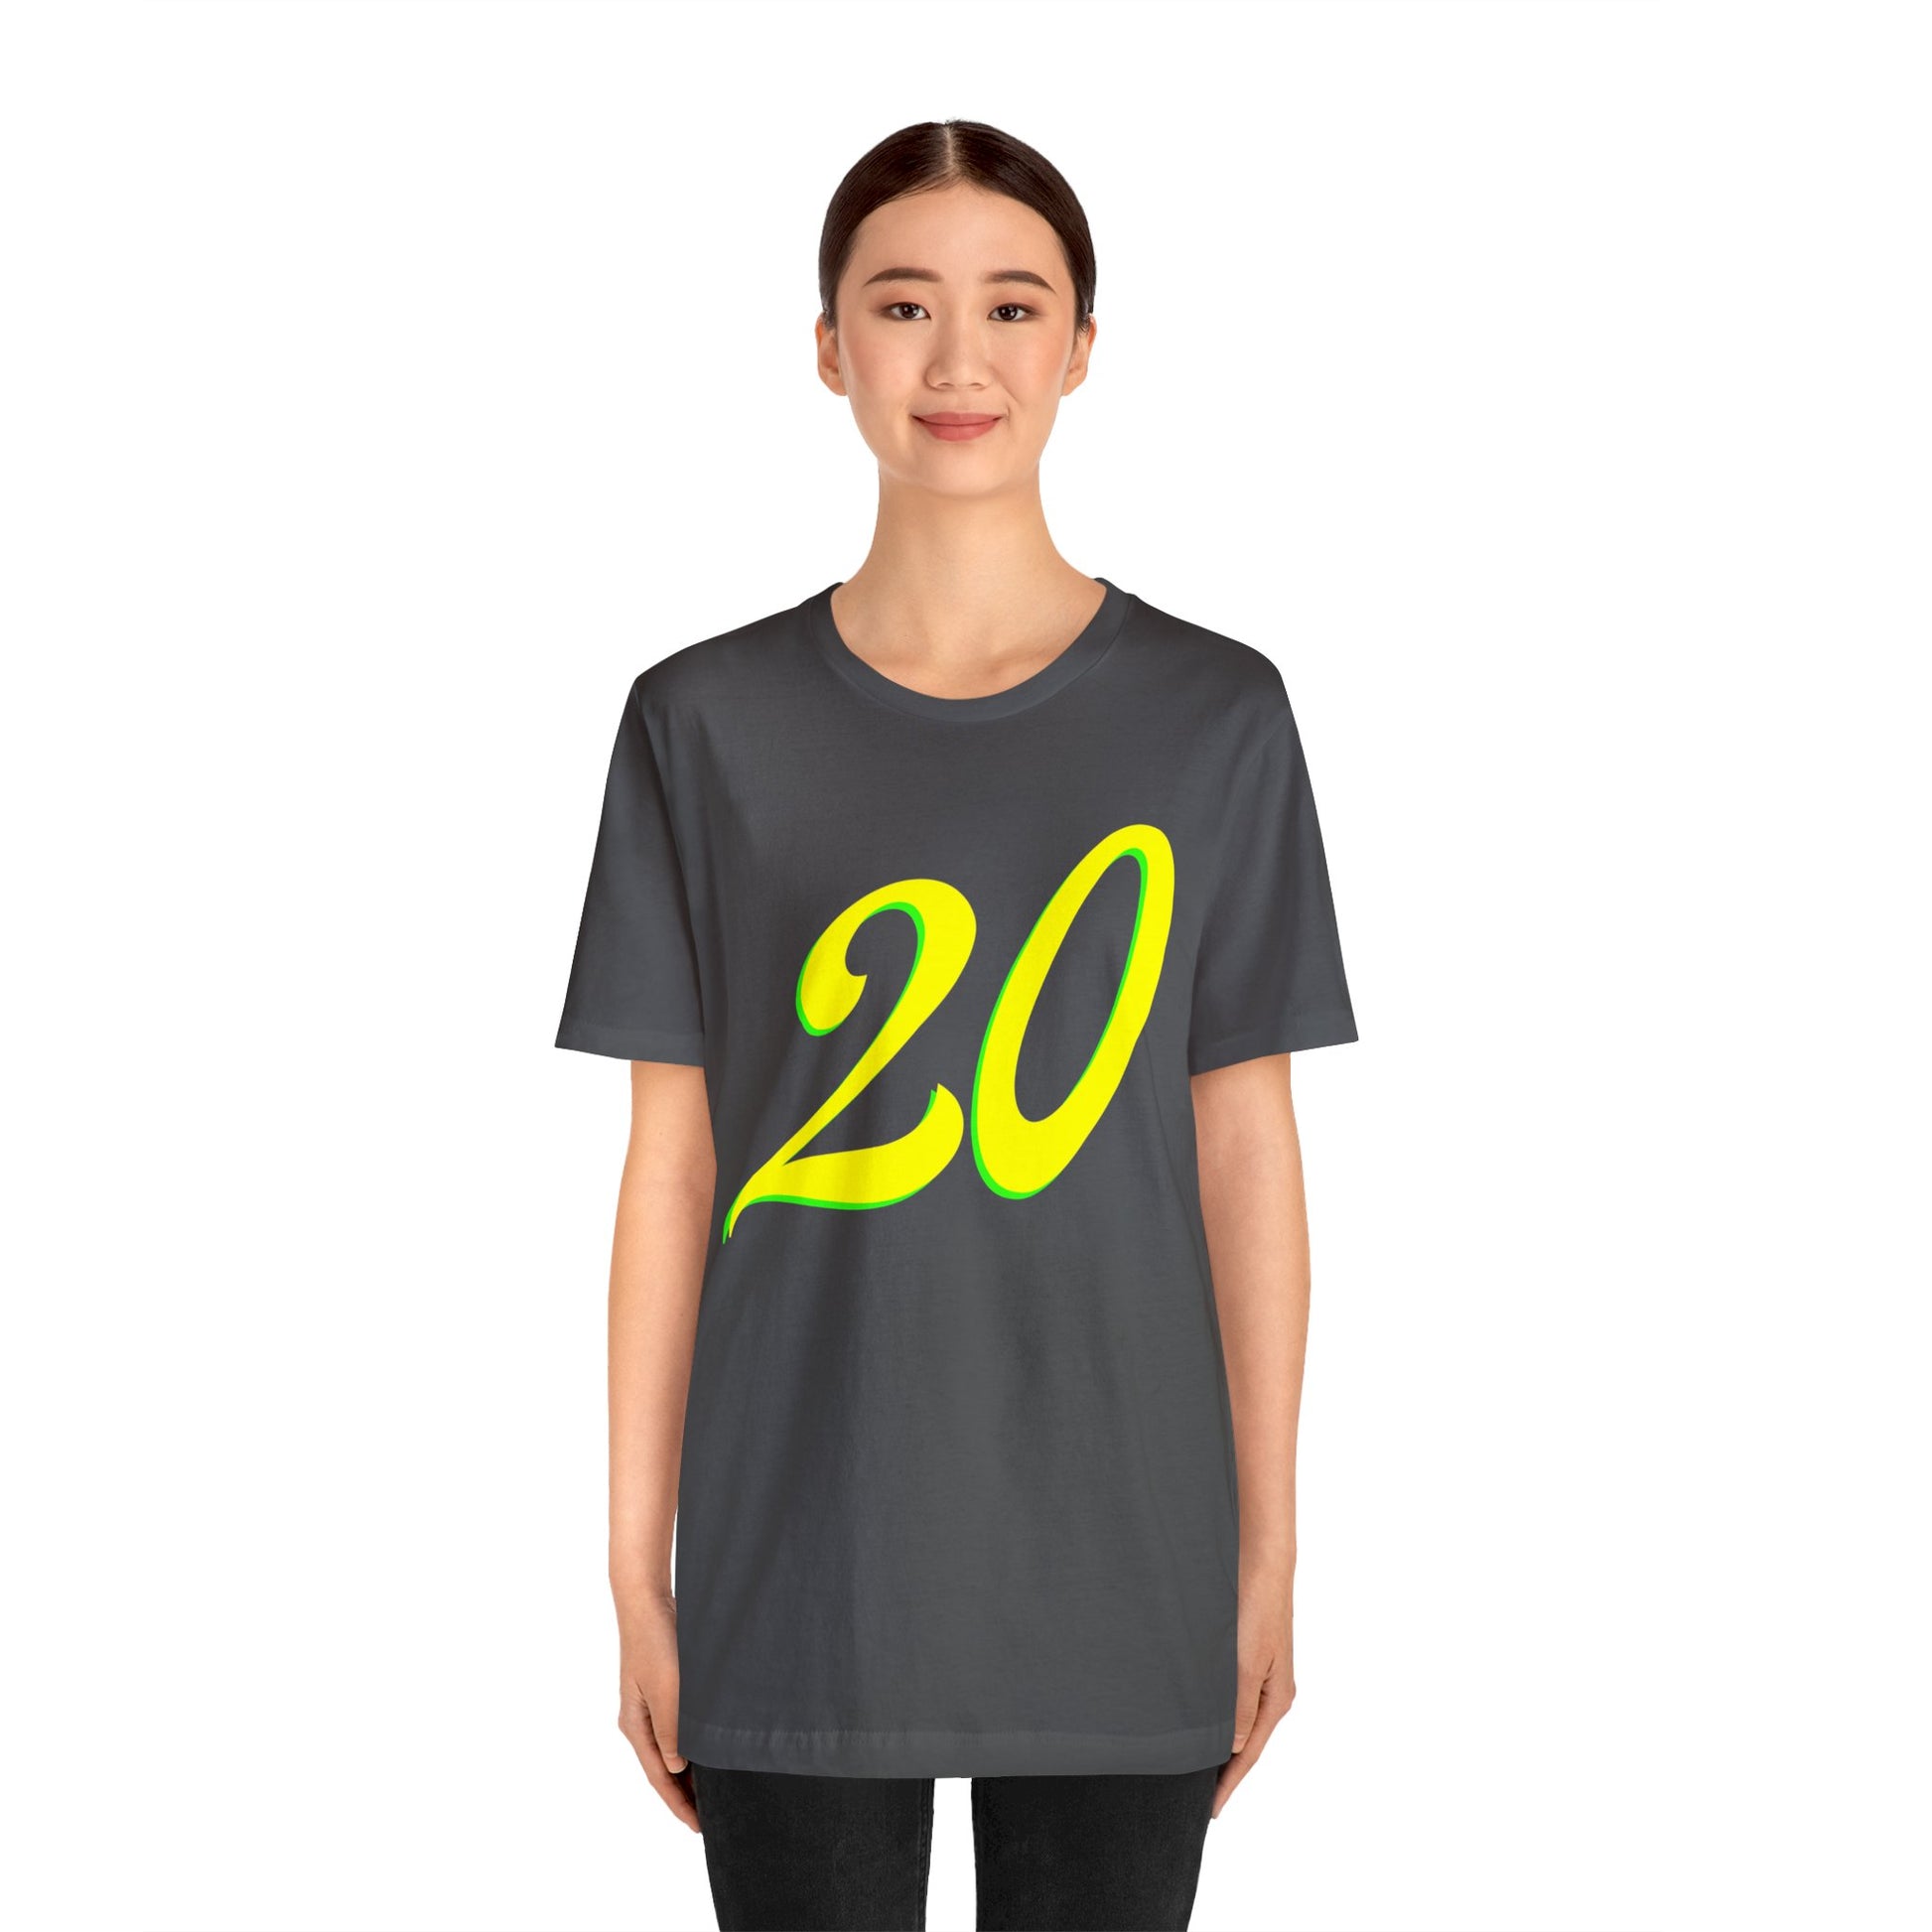 Number 20 Design - Soft Cotton Tee for birthdays and celebrations, Gift for friends and family, Multiple Options by clothezy.com in Black Size Medium - Buy Now